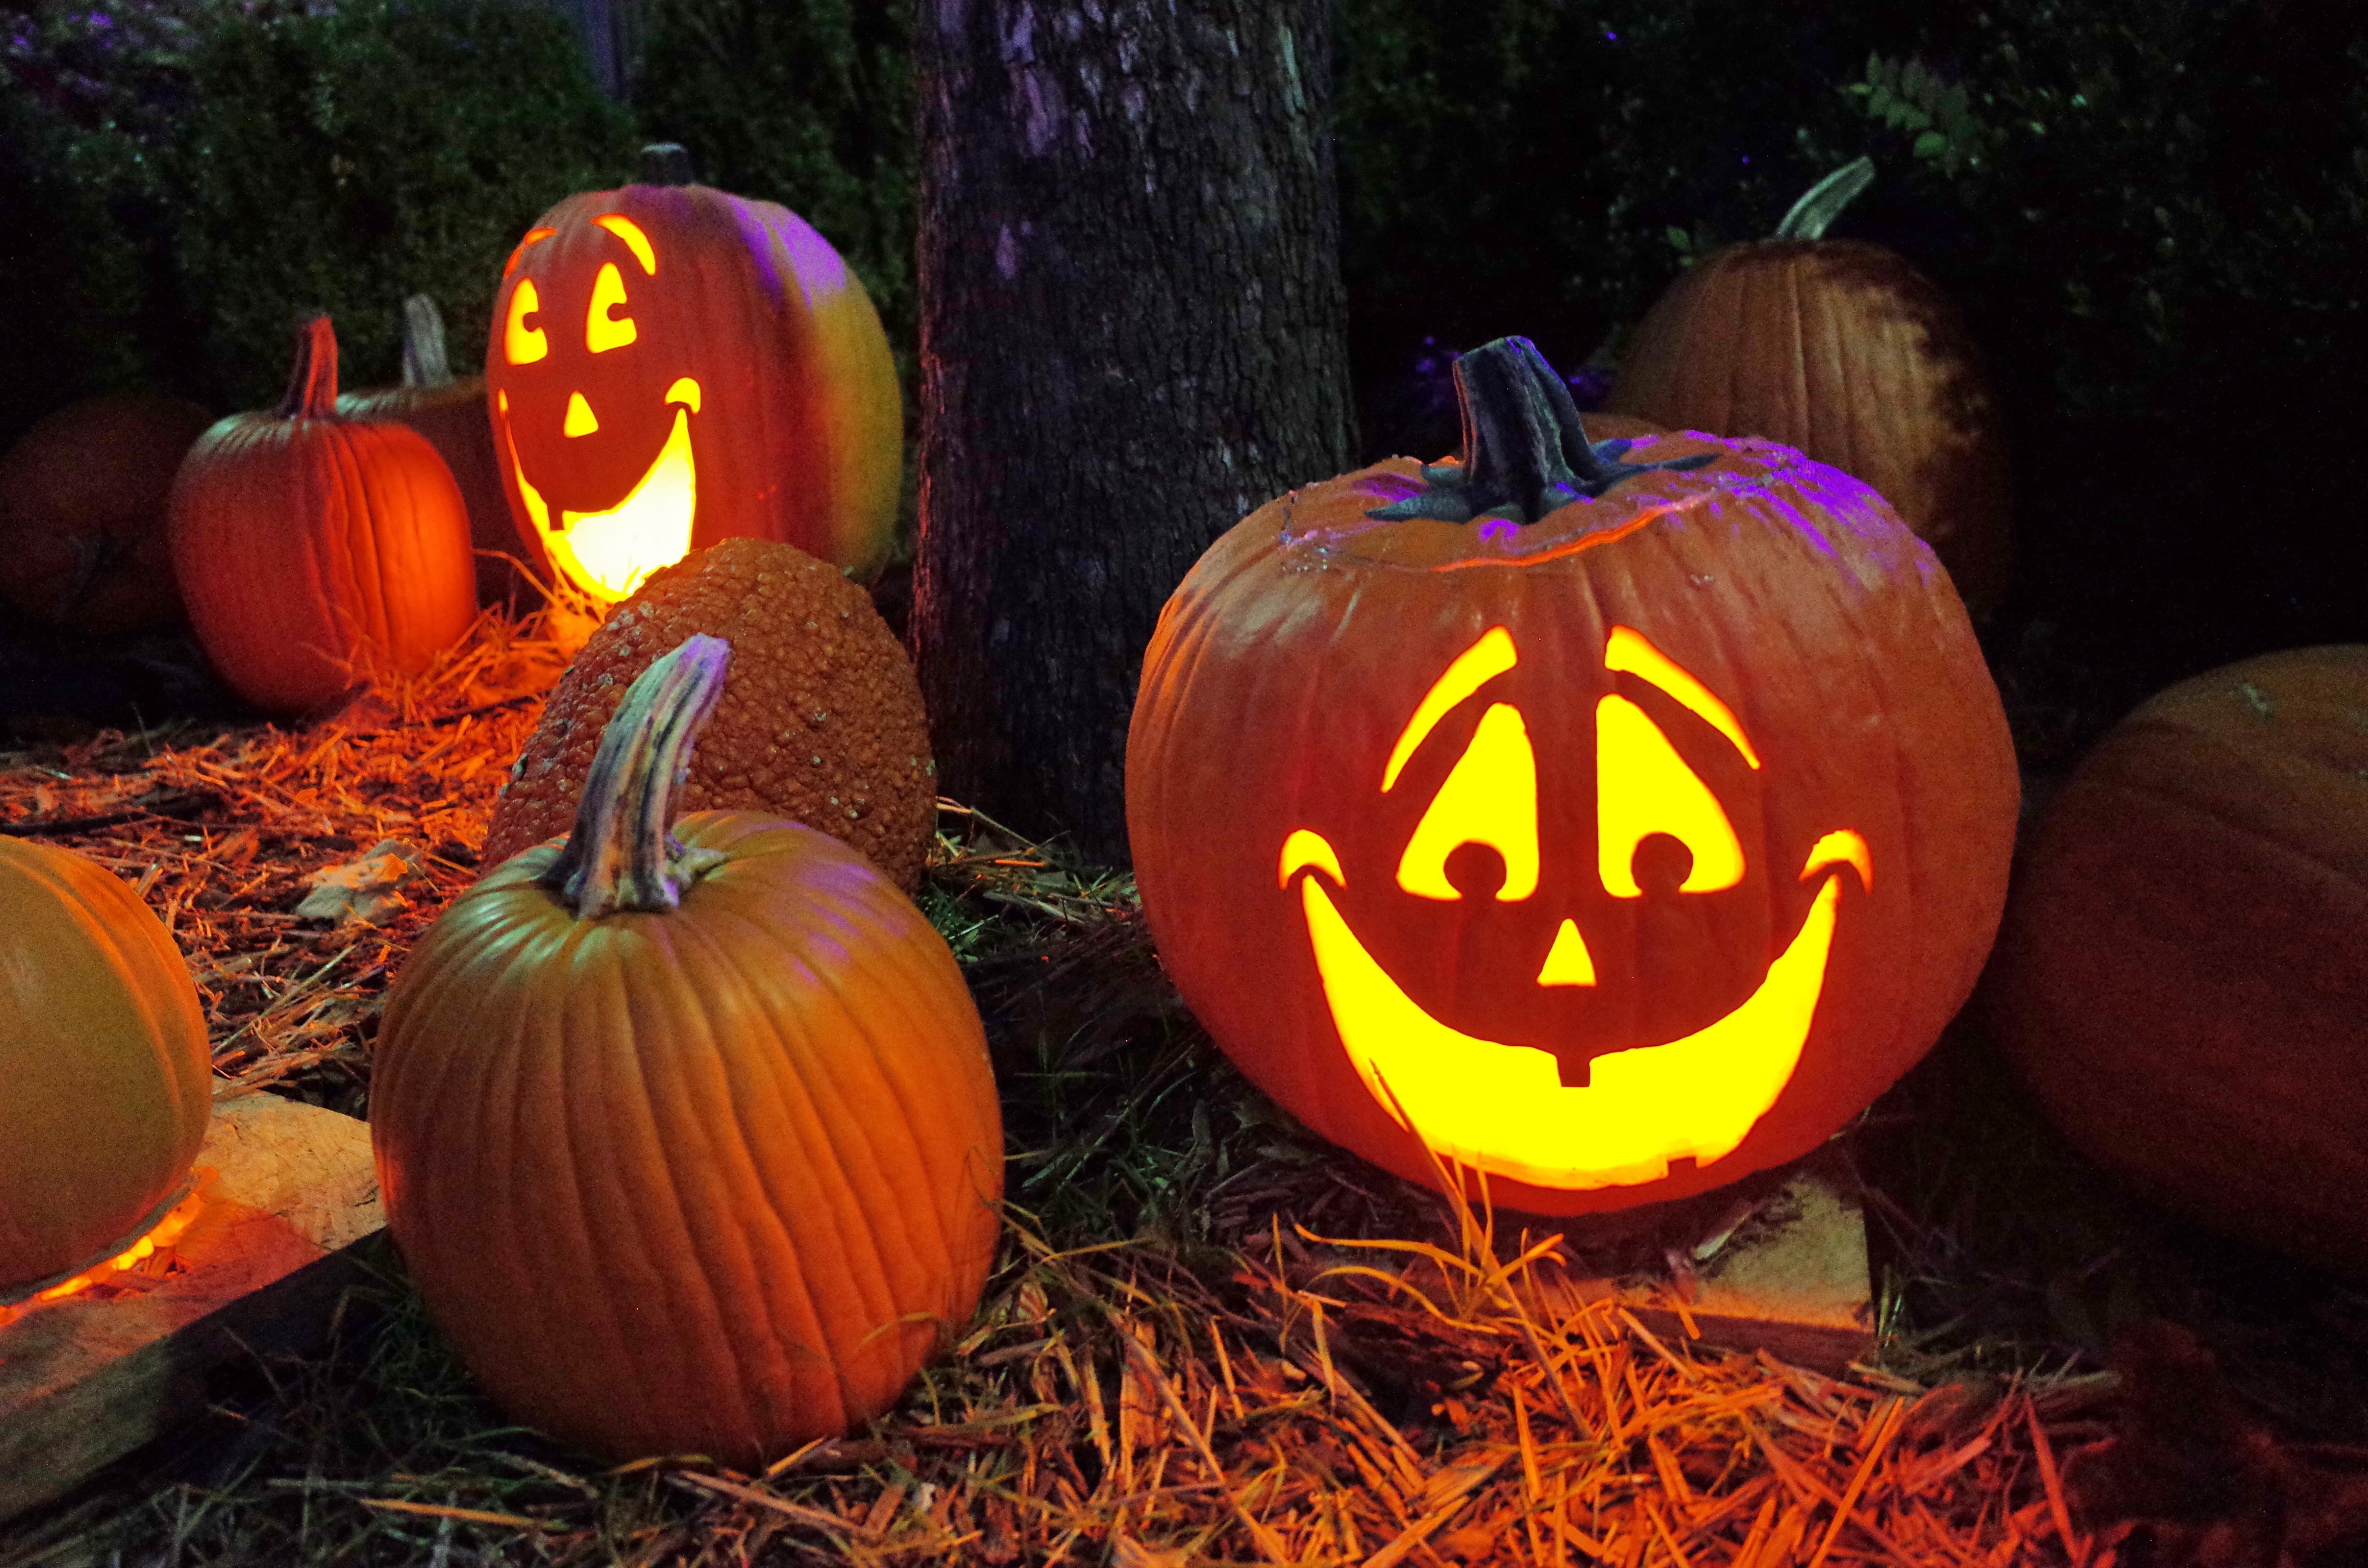 Hundreds of free printable pumpkin carving templates and stencils